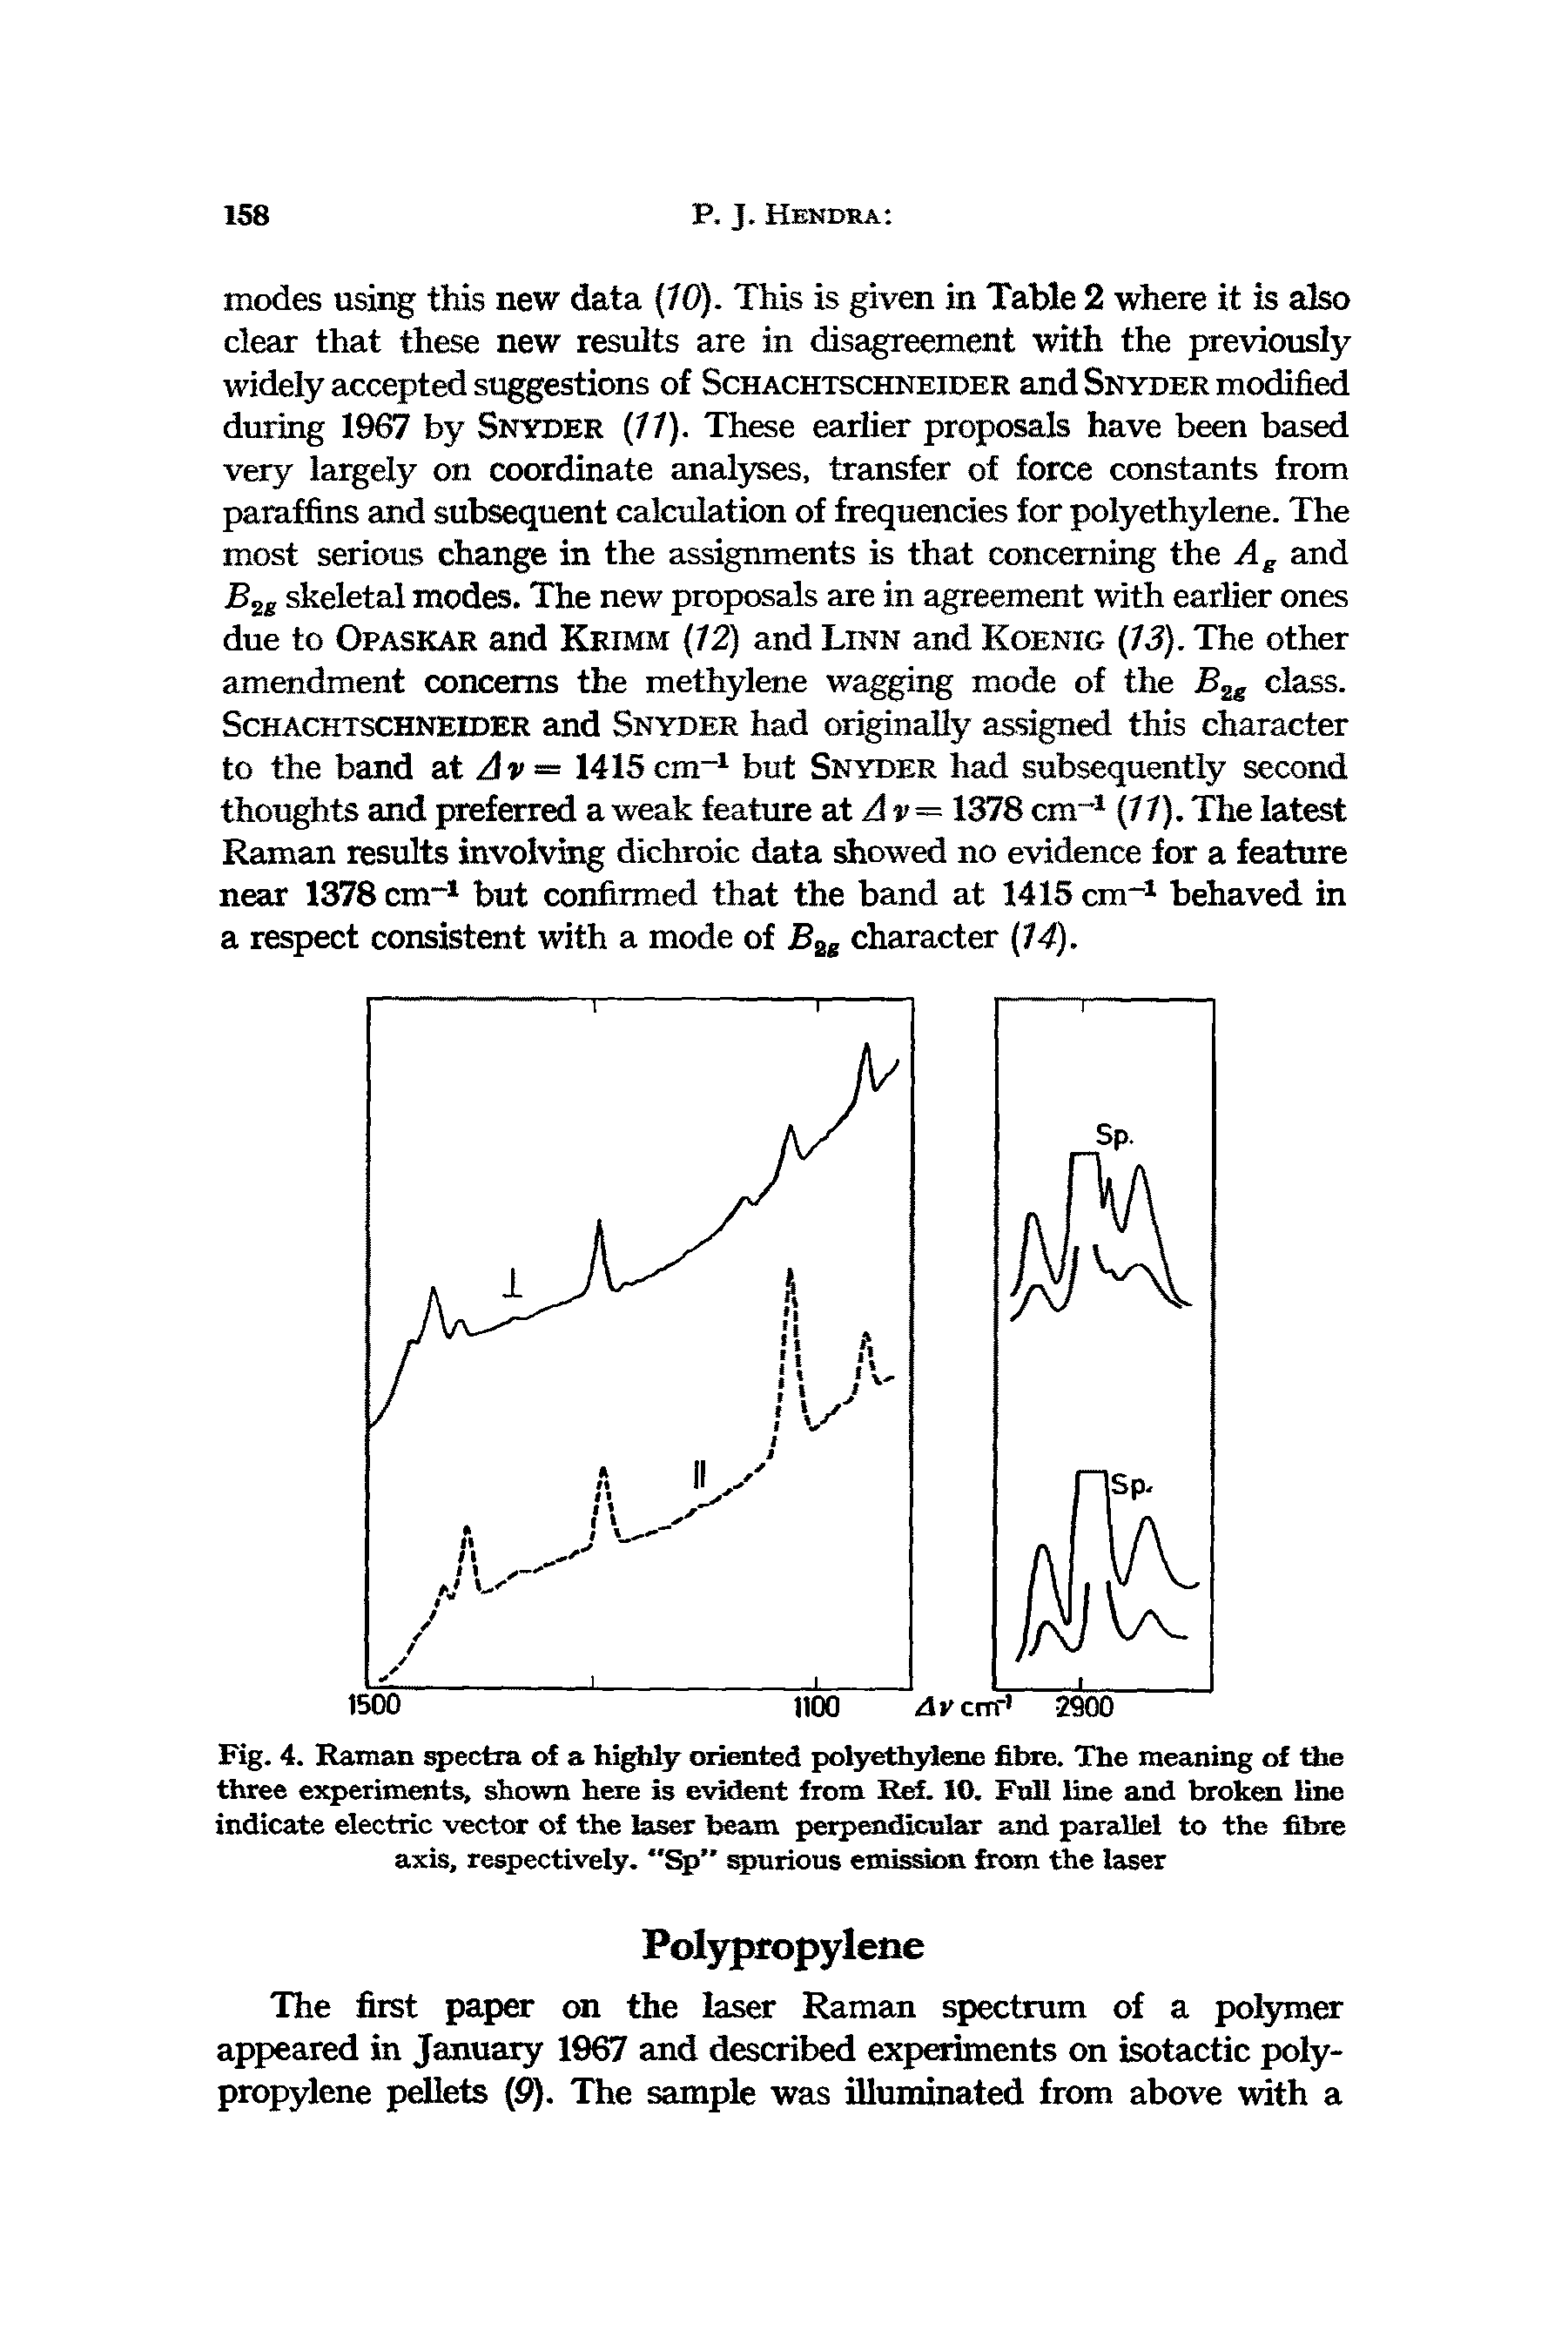 Fig. 4. Raman spectra of a highly oriented polyethylene fibre. The meaning of the three experiments, shown here is evident from Ref. 10. Full line and broken line indicate electric vector of the laser beam perpendicular and parallel to the fibre axis, respectively. "Sp" spurious emission from the laser...